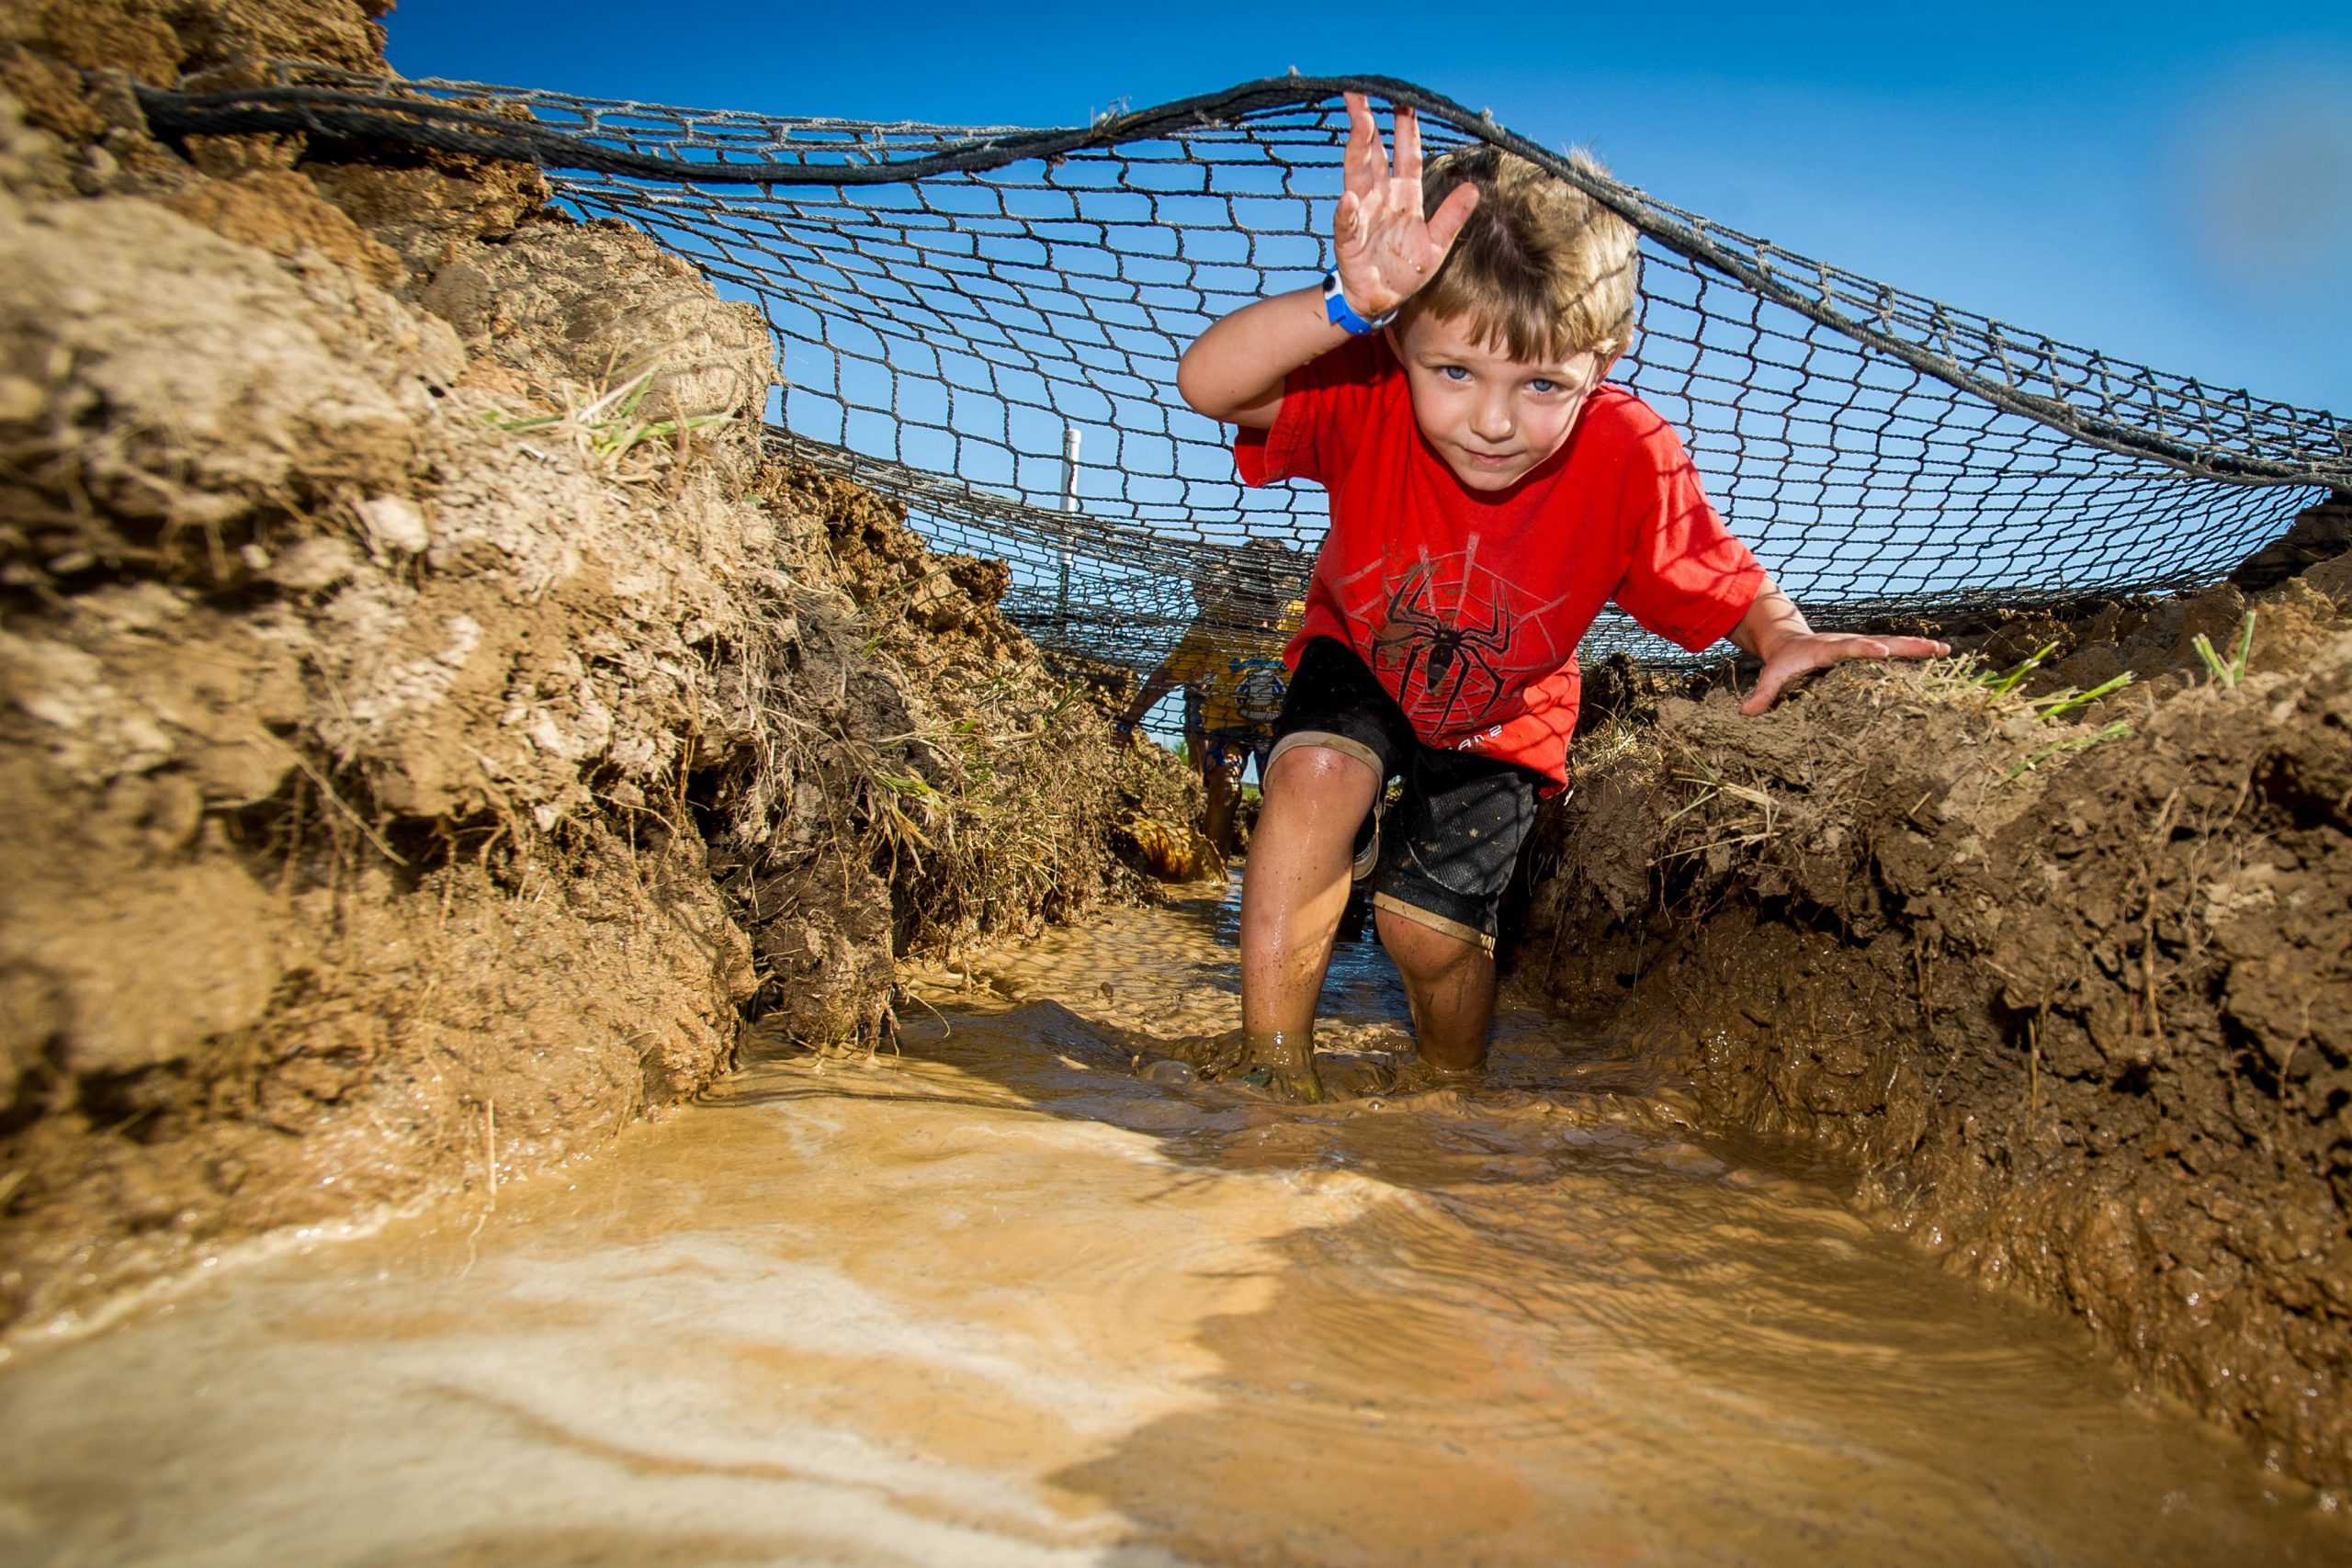 Splat: Boy in red shirt navigating the net obstacle.